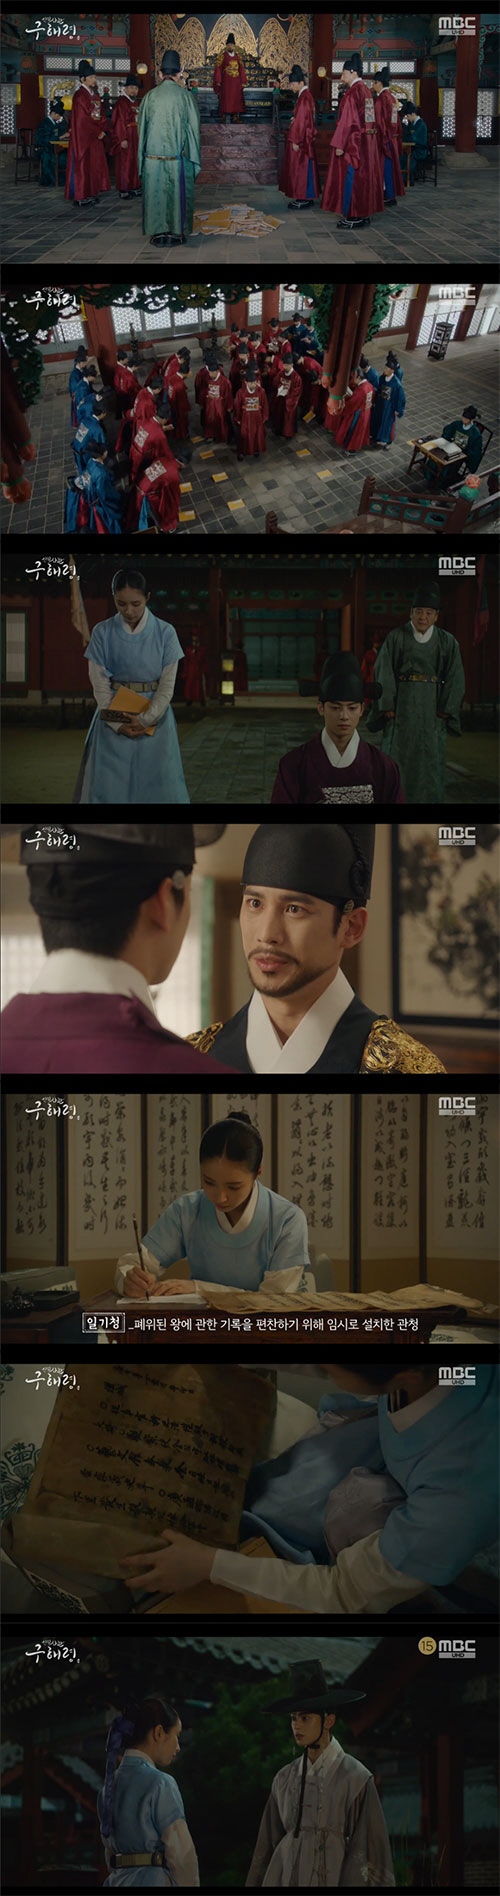 Cha Eun-woo and Shin Se-kyung have found where Seocho hid.In the MBC drama The New Entrance Rookie Historian Goo Hae-ryung broadcasted on the 19th, Lee Lim (Cha Eun-woo) Rookie Historian Goo Hae-ryung (Shin Se-kyung) were shown a step closer to the truth related to Seoraewon.Rookie Historian Goo Hae-ryung said, Twenty years ago my father died of a reverse crime, so my brother took me to Cheongna to save me.From then on, I lived as Rookie Historian Goo Hae-ryung; I am a fugitive for 20 years, he said.How did that happen? Lee said, and Rookie Historian Goo Hae-ryung said, I was the dean of Seoraewon and I heard that he was caught in a reverse.Irim said, I heard that I was studying myodoma. Rookie Historian Goo Hae-ryung was tearful, upset that he was the only daughter and did not know my fathers writing.At this time, Lee stopped to hug Rookie Historian Goo Hae-ryung and said, Its okay to say it if its hard.Rookie Historian Goo Hae-ryung recalled, I only knew that my father had written An Innocent Man and died unfairly.Rookie Historian Goo Hae-ryung said: Now I want to know what my father wrote An Innocent Man, what happened in Seoraewon.I want to understand, he said, and Irim also said, I do the same. I want to understand everything. Do you know what happened the day I was born? Irim asked Heo Sam-bo (Seong Ji-ru), and Heo Sam-bo said, Everyone was happy with the king and the preparations, and the whole palace was a sergeant.However, Irim was angry at Huh Sambo and said, What are you hiding from me?Rookie Historian Goo Hae-ryung recalled when he met Lee Kyum (Yoon Jong-hoon) in the past, and Lee Kyum was looking for a book by holding a young Rookie Historian Goo Hae-ryung, saying, Call me Hodam.At this time, Rookie Historian Goo Hae-ryungs father appeared and showed tears.Irim rode to Baro Palace, while Daehan Lim (Kim Yeo-jin) started to worry after hearing the story of Irim from Heo Sam-bo.Irim said, I have something to say to the palace, looking for a garden.Just try to hurt the Taoyuan, and I will hang myself, and then I will remain the king who has put my neck on the future generations, said Lim, who called Lee Tae (Kim Min-sang).Rookie Historian Goo Hae-ryung began to search the room while Koo Jae-kyung (Fairy Hwan) was away for a while, and found a old book containing the contents of the diary.Rookie Historian Goo Hae-ryung asked Min Woo-won (Lee Ji-hoon) if he had heard about Kim Il-mok and other officers had been penalized because he did not give a shoot to surprise Rookie Historian Goo Hae-ryung.Min Woo-won said, He died of a high-criminal in the Chuguk government. There is nothing good to know.Lee Jin (Park Ki-woong) told the story of Dae-han Lim to come to the diary of Seung-jung-won, and the insider informed him that Dowon also took the diary of Seung-jung-won.In the end, Lee Jin went to Irim, and Irim said, There is no story at the time of my birth.My name is nowhere to be seen, Lee Jin said, I was outside and I probably came in and said, It would not have been a few because it was a story outside the palace. Lee asked, Have you ever seen my mother when she was in office? Lee Jin said, I have seen her. I also remember the day I met you.Dont ever get me wrong again, youre my family and being the only brother doesnt change, he said.However, Irim avoided his seat with tears when he heard Lee Jin.Irim went to see Baro Hamyoung, and Hamyoung refused to meet, saying, My body is not good.But Irim said, Please meet me in Alabama. My son came back after his resurrection. Do you wonder? He knelt down and said, I must meet Abama today.I will not step down until you meet me. Finally, Hamyoung appeared in front of Leerim and said, You have accompanied her. What is it?I have nothing to say, he said, and Irim said, Have you ever loved the device at least once?Have you ever thought of me or missed me, have you ever been fond of me?I asked in Abamamas mind whether I was a son, but Ham Young-gun turned and eventually could not hear the answer.Irim, who returned to the Green Seodang, shed tears in the appearance of Ham Young-gun, who had not given him a glance since he was a child, and shed tears with Rookie Historian Goo Hae-ryung.Rookie Historian Goo Hae-ryung tried to find the story of the year of the year in the authors bookstore, but the owner of the Heavens Bookstore said, What contains the story of the year is a gold book.Do not take away your strength. At this time, the palace began to turn around in the palace, and the palace was overturned due to the sudden appearance of the Hodam Teacher.Hamyoung-gun was angry that he knew that Hodam Teacher was circulating in the palace and said, What kind of man did it? However, already in the palace, Hodam Teacher spread and the palace people started to turn this gold.Hodam Teachers Exhibition has already spread to Sungkyunkwan outside the palace.Rookie Historian Goo Hae-ryung was told to bring this book to Seung Jung Won and headed to Seung Jung Won. Lee came up with the word I am looking for a book called Hodam Teacher and hid one book.Hamyoung said, Those who read the book will also stand on the mold and pull out their tongues. Min-pyeong (Choi Duk-moon) said, We should catch people who are not reading and distribute.We must find those who have insulted the adjustment and punish them for high treason. Please treat this matter calmly. There were no women and no women in the book, and they all dreamed the same thing, but in the eyes of people, it was a place to learn the writing of the Orangka, and the rumor soon became true.In the end, Hodam and Yeongam were also killed by a knife. They could not open a new morning.Rookie Historian Goo Hae-ryung, who read this book, shed endless tears thinking about his father.At this time, Koo Jae-kyung returned home and was surprised to see the Hodam Teacher in the hands of Rookie Historian Goo Hae-ryung.Rookie Historian Goo Hae-ryung said, No matter how you think, the only thing you know best about Seoraewon is his brother, who wrote this book.If Hodam is a dead man and Yeongam is my father, is it related to the king now? I do not know that, I go to the house every day. What is going on?Twenty years ago, that morning, my father greeted me and did not return forever. I can not lose my brother. Rookie Historian Goo Hae-ryung said: So tell me.Tell me what I can do. Koo Jae-kyung said, You can live. Do not get closer. Rookie Historian Goo Hae-ryung visited Irim, and Irim told Rookie Historian Goo Hae-ryung, Have you read Hodam Teacher?I need to know what happened.I need to know what truth there is, and Rookie Historian Goo Hae-ryung said, There was a man named Kim Il-mok who did not give a candle. Lee said, Do you mean that the herb is left? Rookie Historian Goo Hae-ryung said, Thats what it means. At the time of Kim Il-moks death, he went to the remaining officer.But the officer was angry, saying, I am a drunken man, and Rookie Historian Goo Hae-ryung said, Its not a sage, Im the daughter.I came here because I wanted to know what happened to my father, he said.The officer changed his face brightly and said, Memory knows that the teacher is happy to have a daughter. Rookie Historian Goo Hae-ryung welcomed him.The officer asked, What does it say in the Seungjungwon diary? Rookie Historian Goo Hae-ryung said, It says that history has been abused, but the officer said, Kim Bonggyo is not such a person.At the time, Kim said, The reason I did not submit the herb is that it will be torn from their hands and corrected.When you go to the island where the green forest is lush, he said, but the officer said, I do not know where Kim Bonggyo said.At this time, Irim stepped out and asked Rookie Historian Goo Hae-ryung, Have you ever thought about the meaning of the Greenery Party? Turns out, the Greenery Party meant a place with a blue forest.